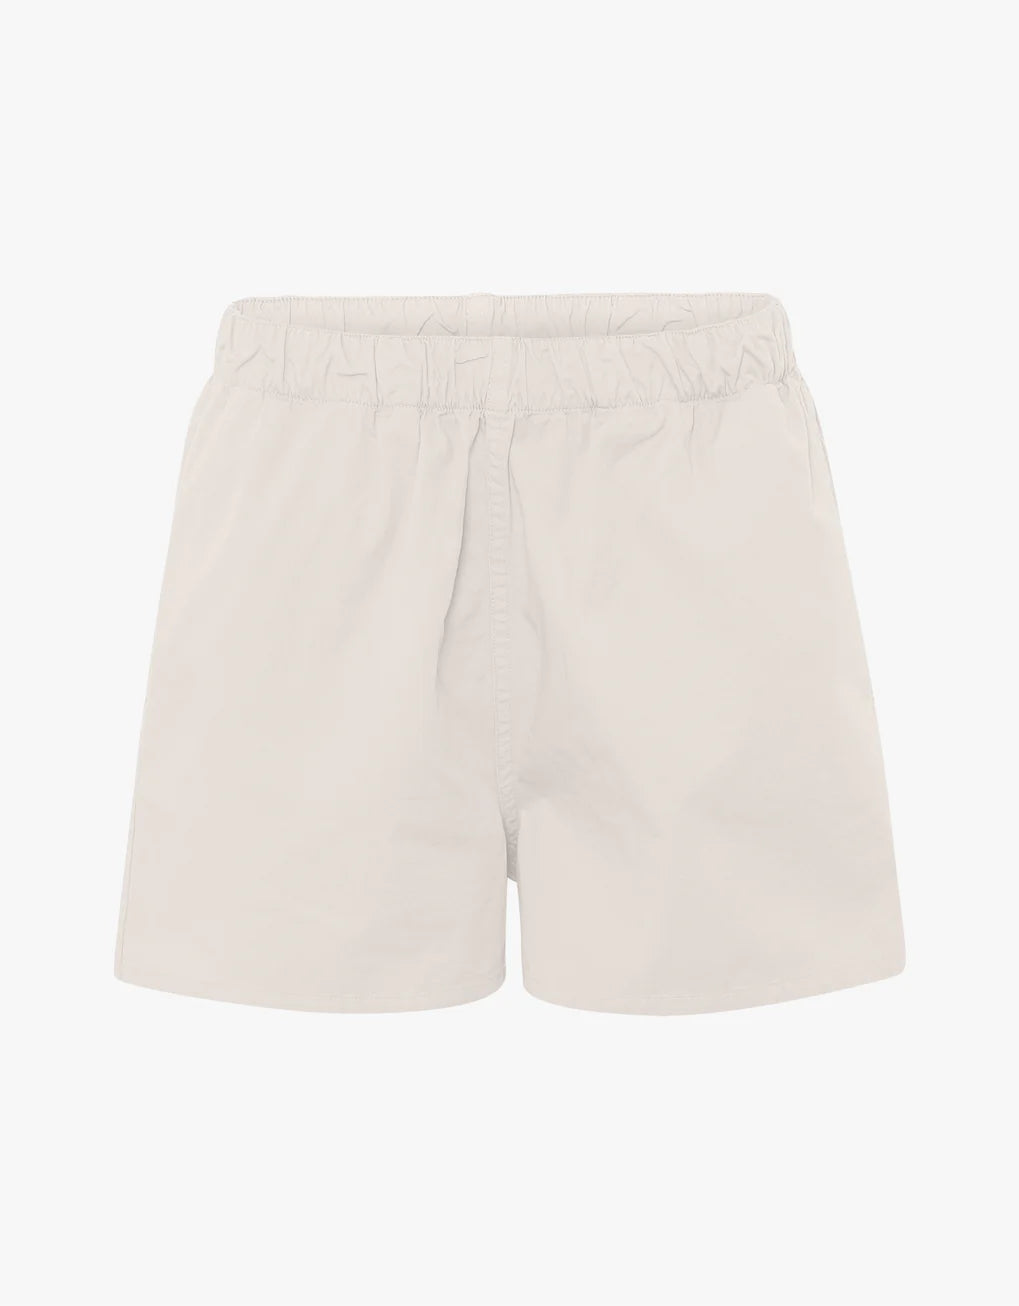 A pair of durable, high-quality Colorful Standard Organic Twill Shorts.